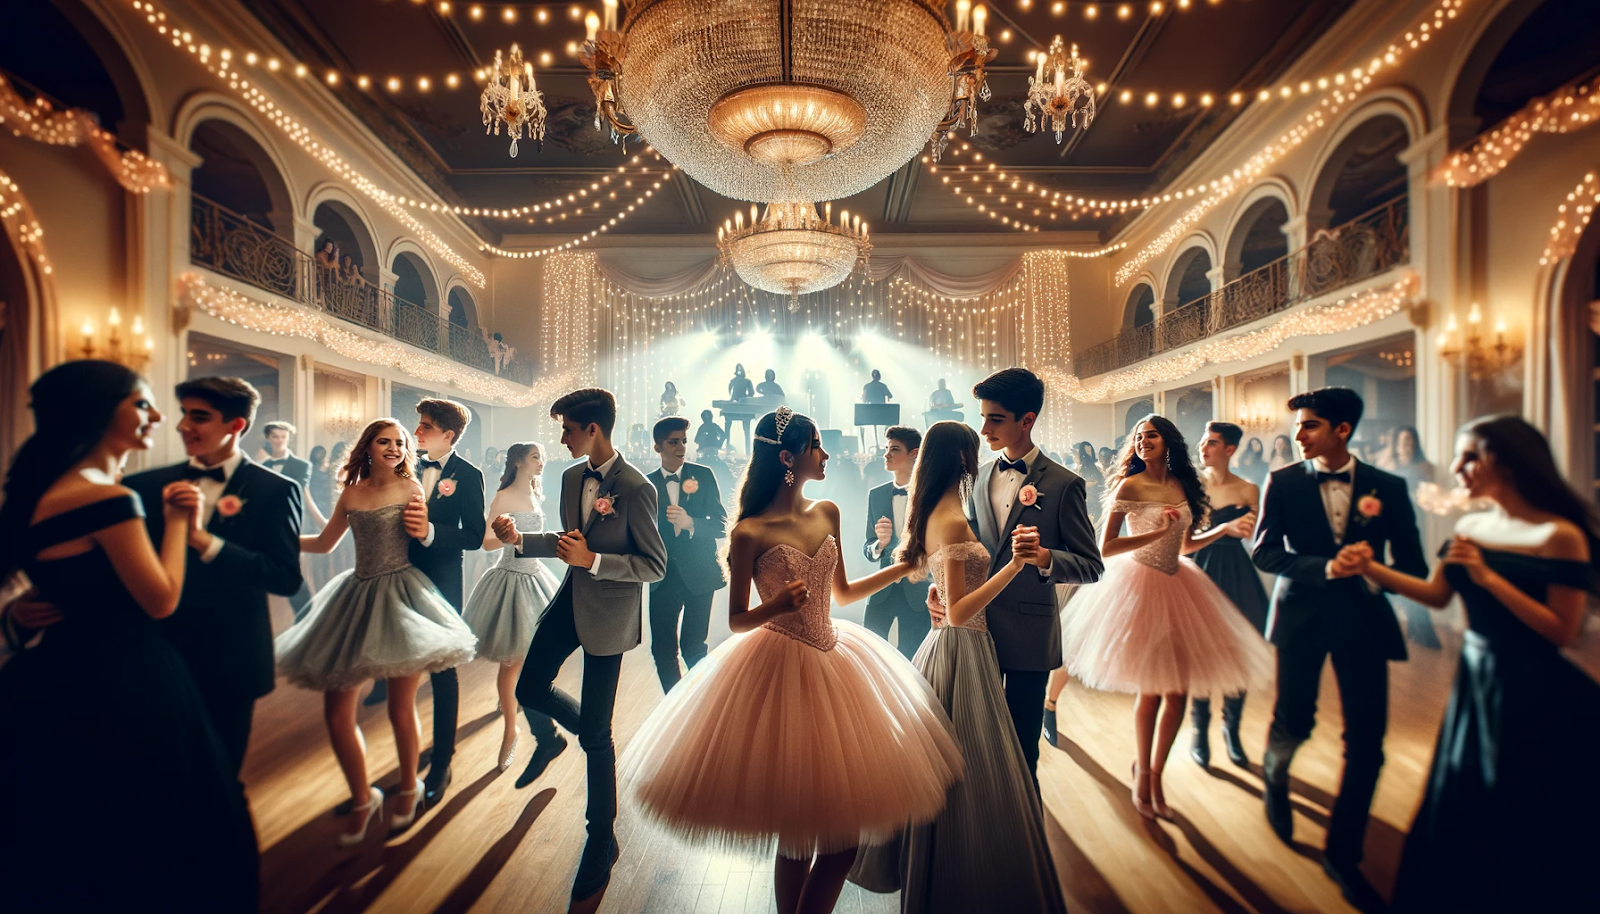 Photograph of a Quinceañera, a group of people dancing in a ballroom